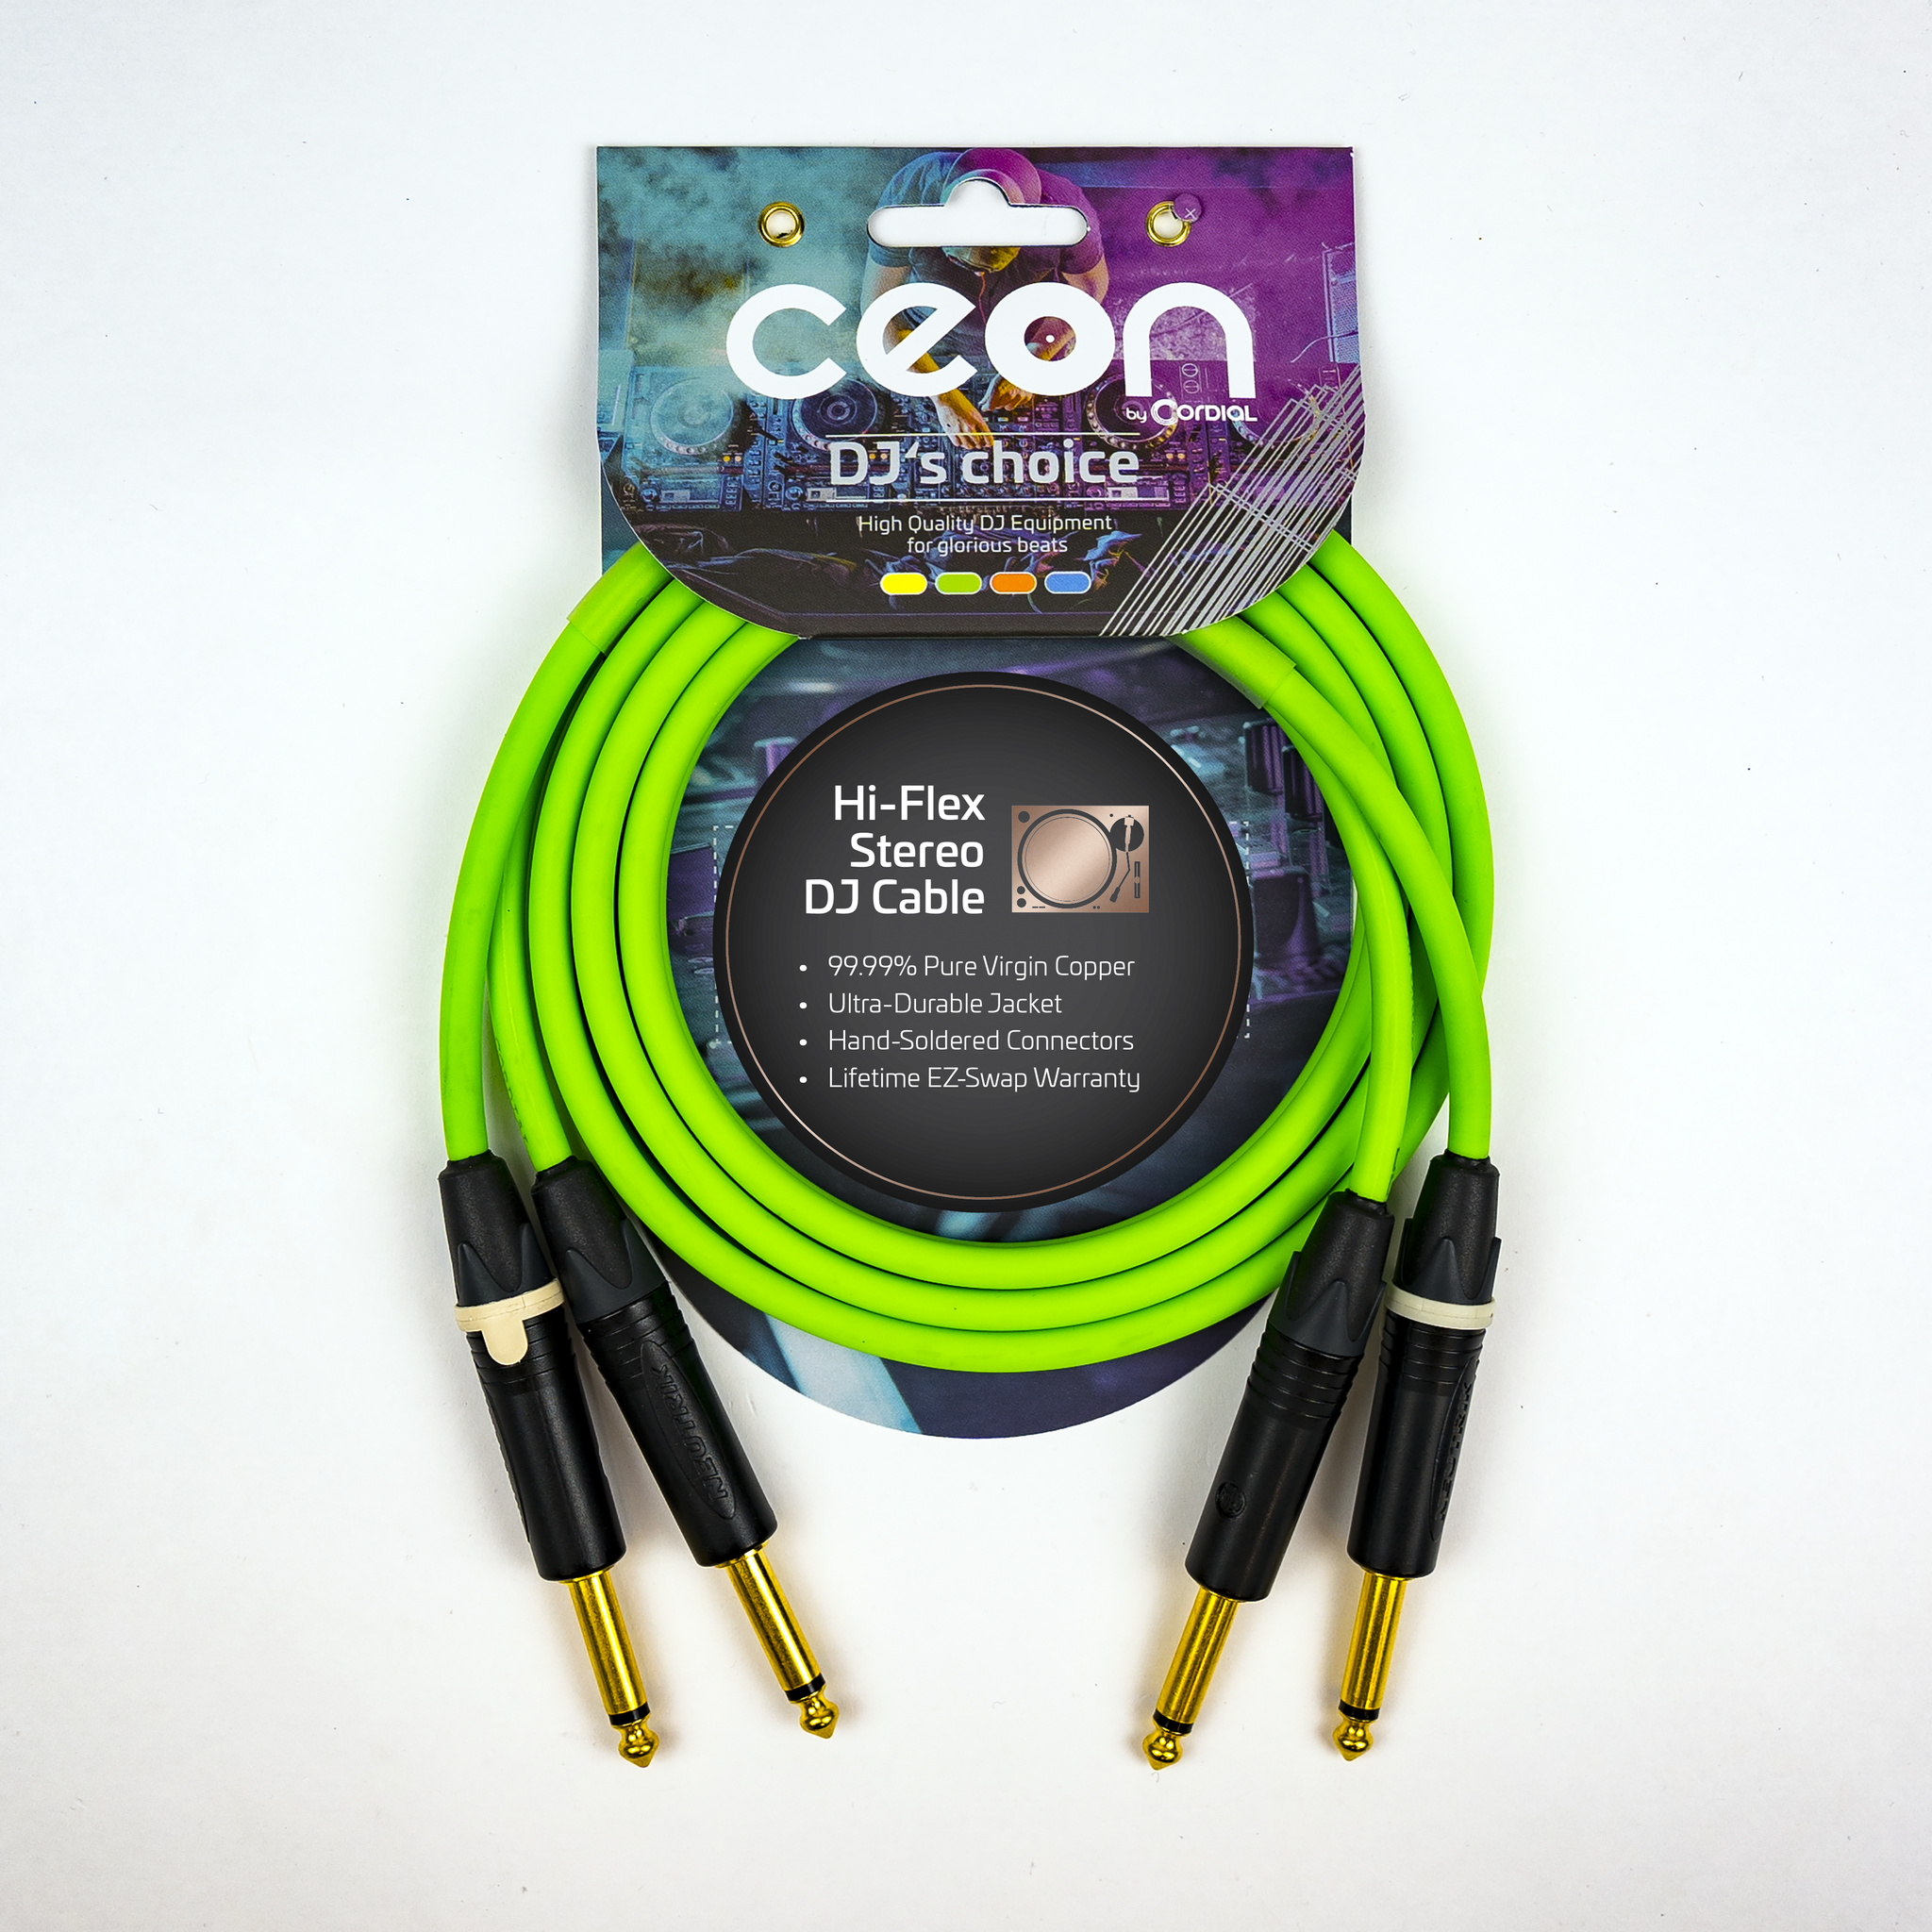 Cordial Cables Premium DJ Dual/Mono (Black Light) Cable, Ceon Series - Hi-Flex DJ's Choice Stereo 1/4" TS to 1/4" TS 5-Foot Cable: Neon Green